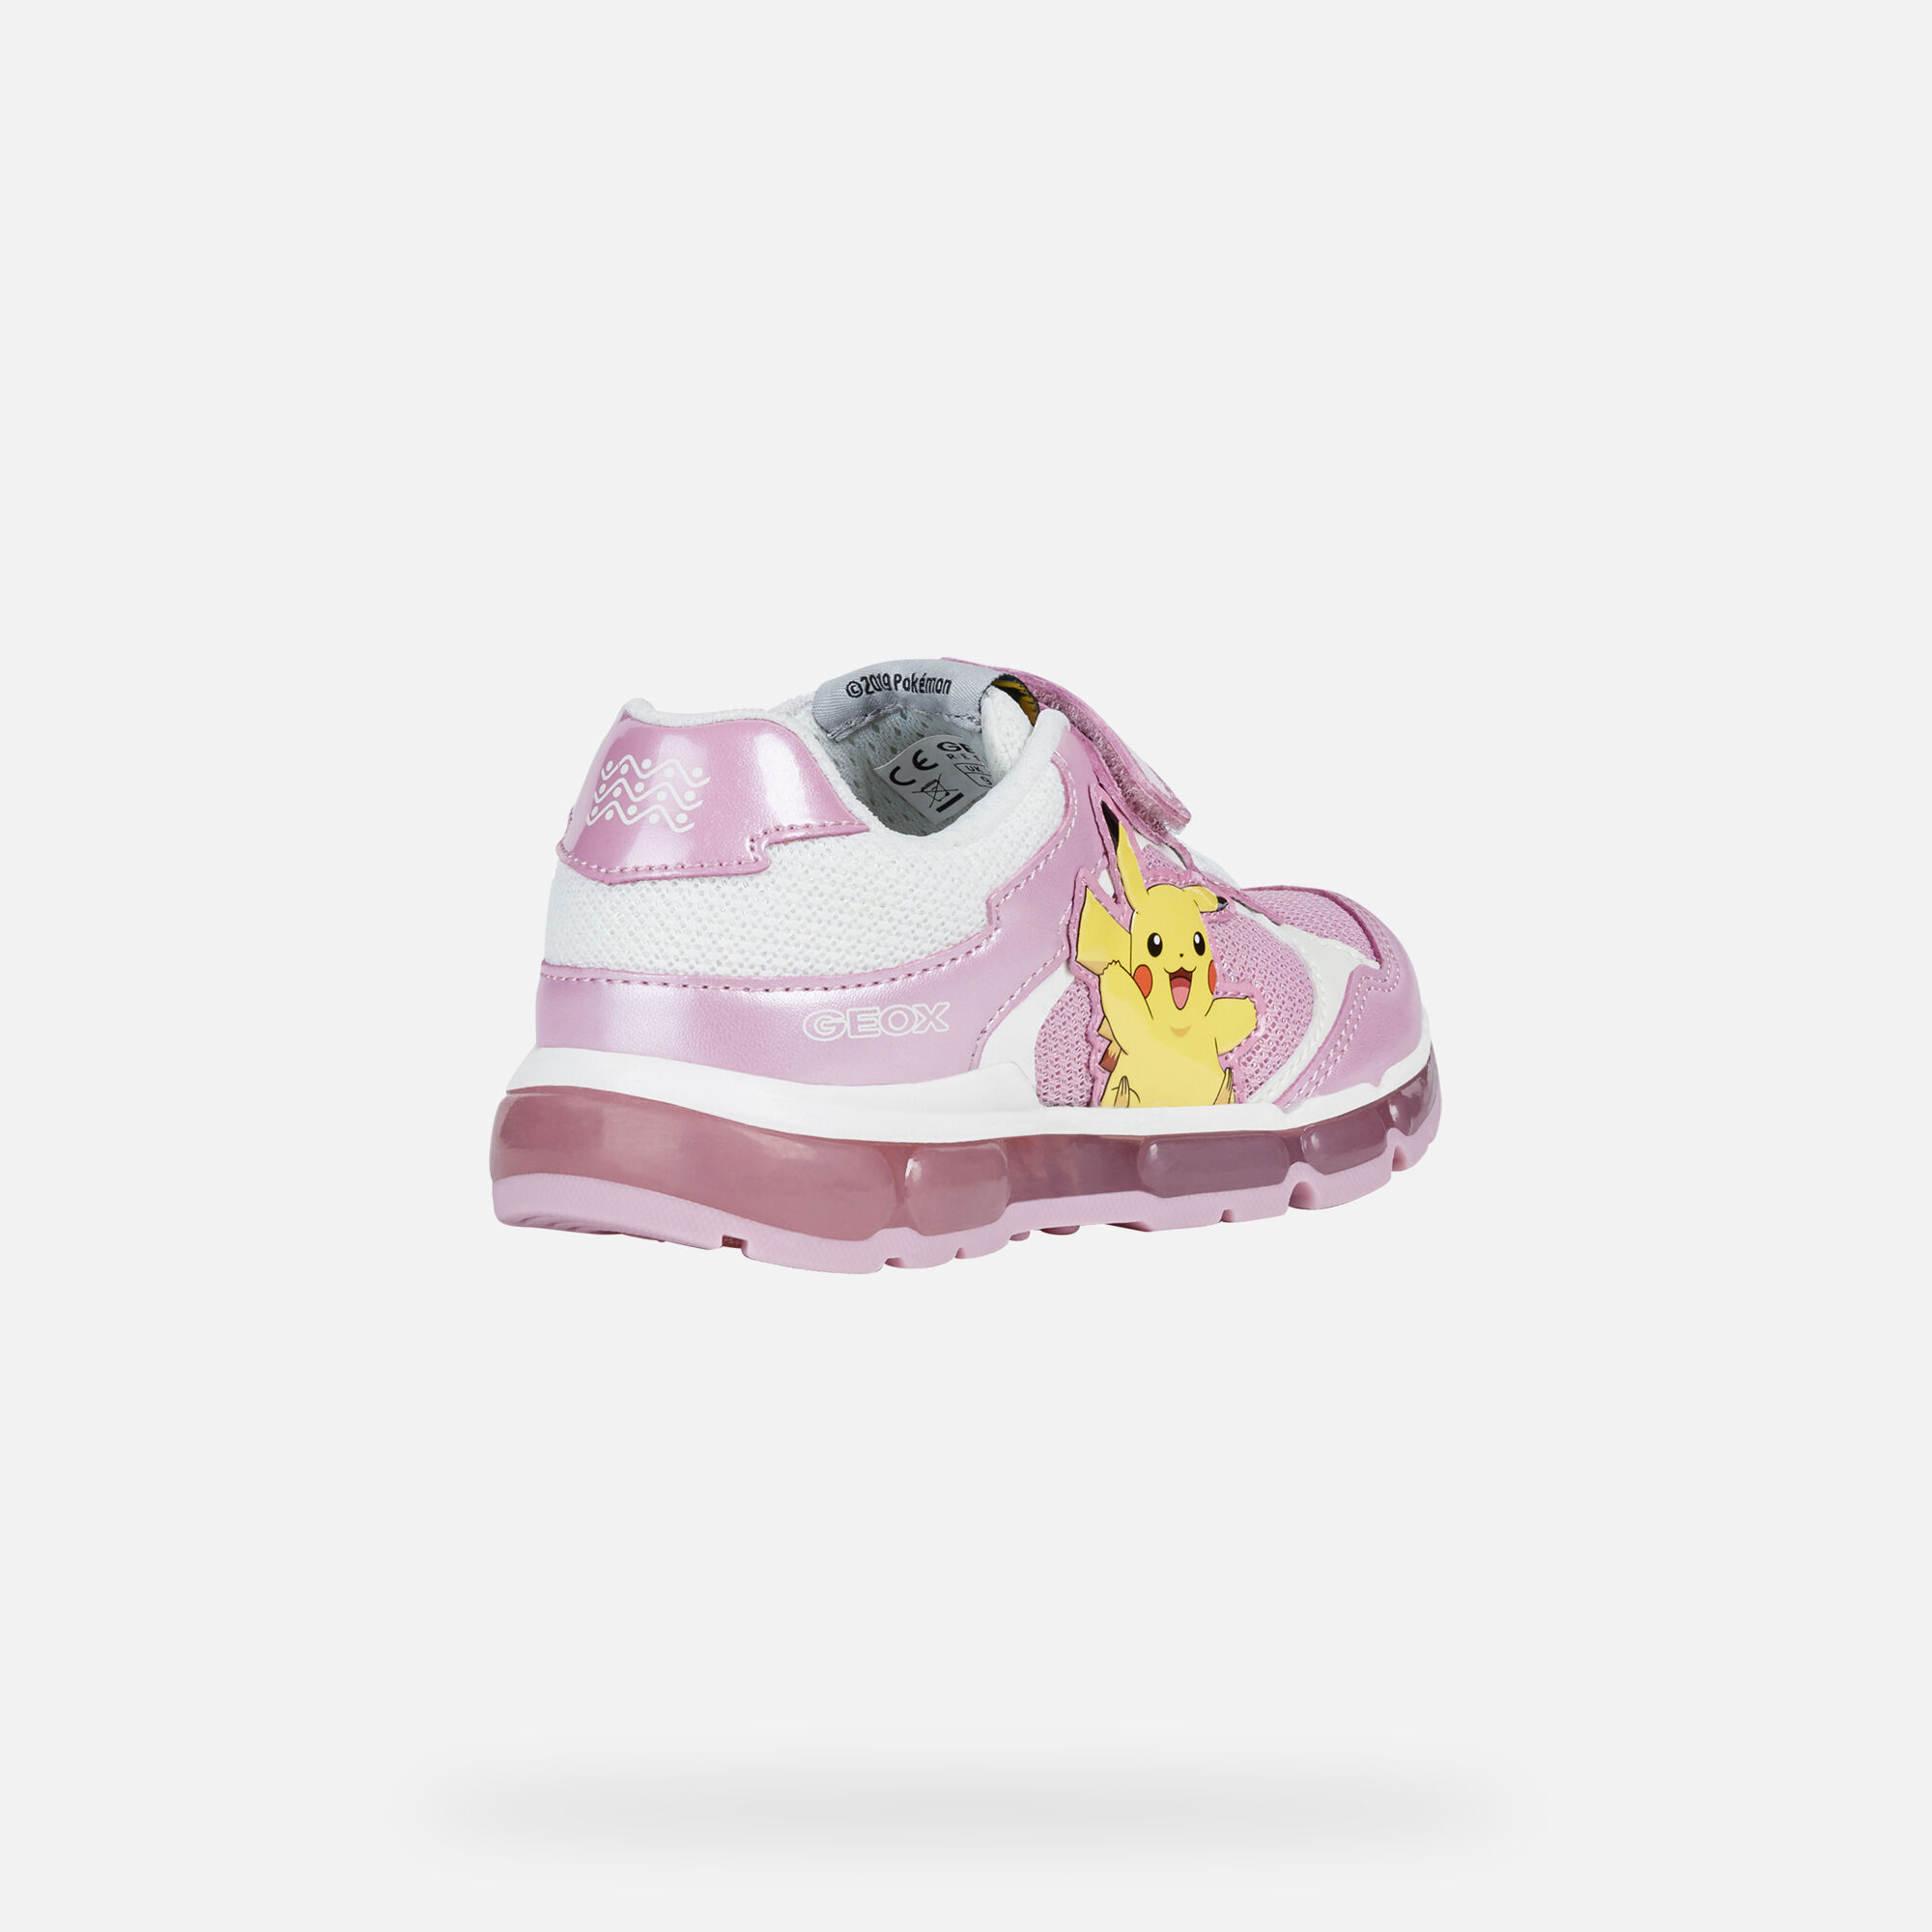 JR ANDROID GIRL - LED SHOES from girls 